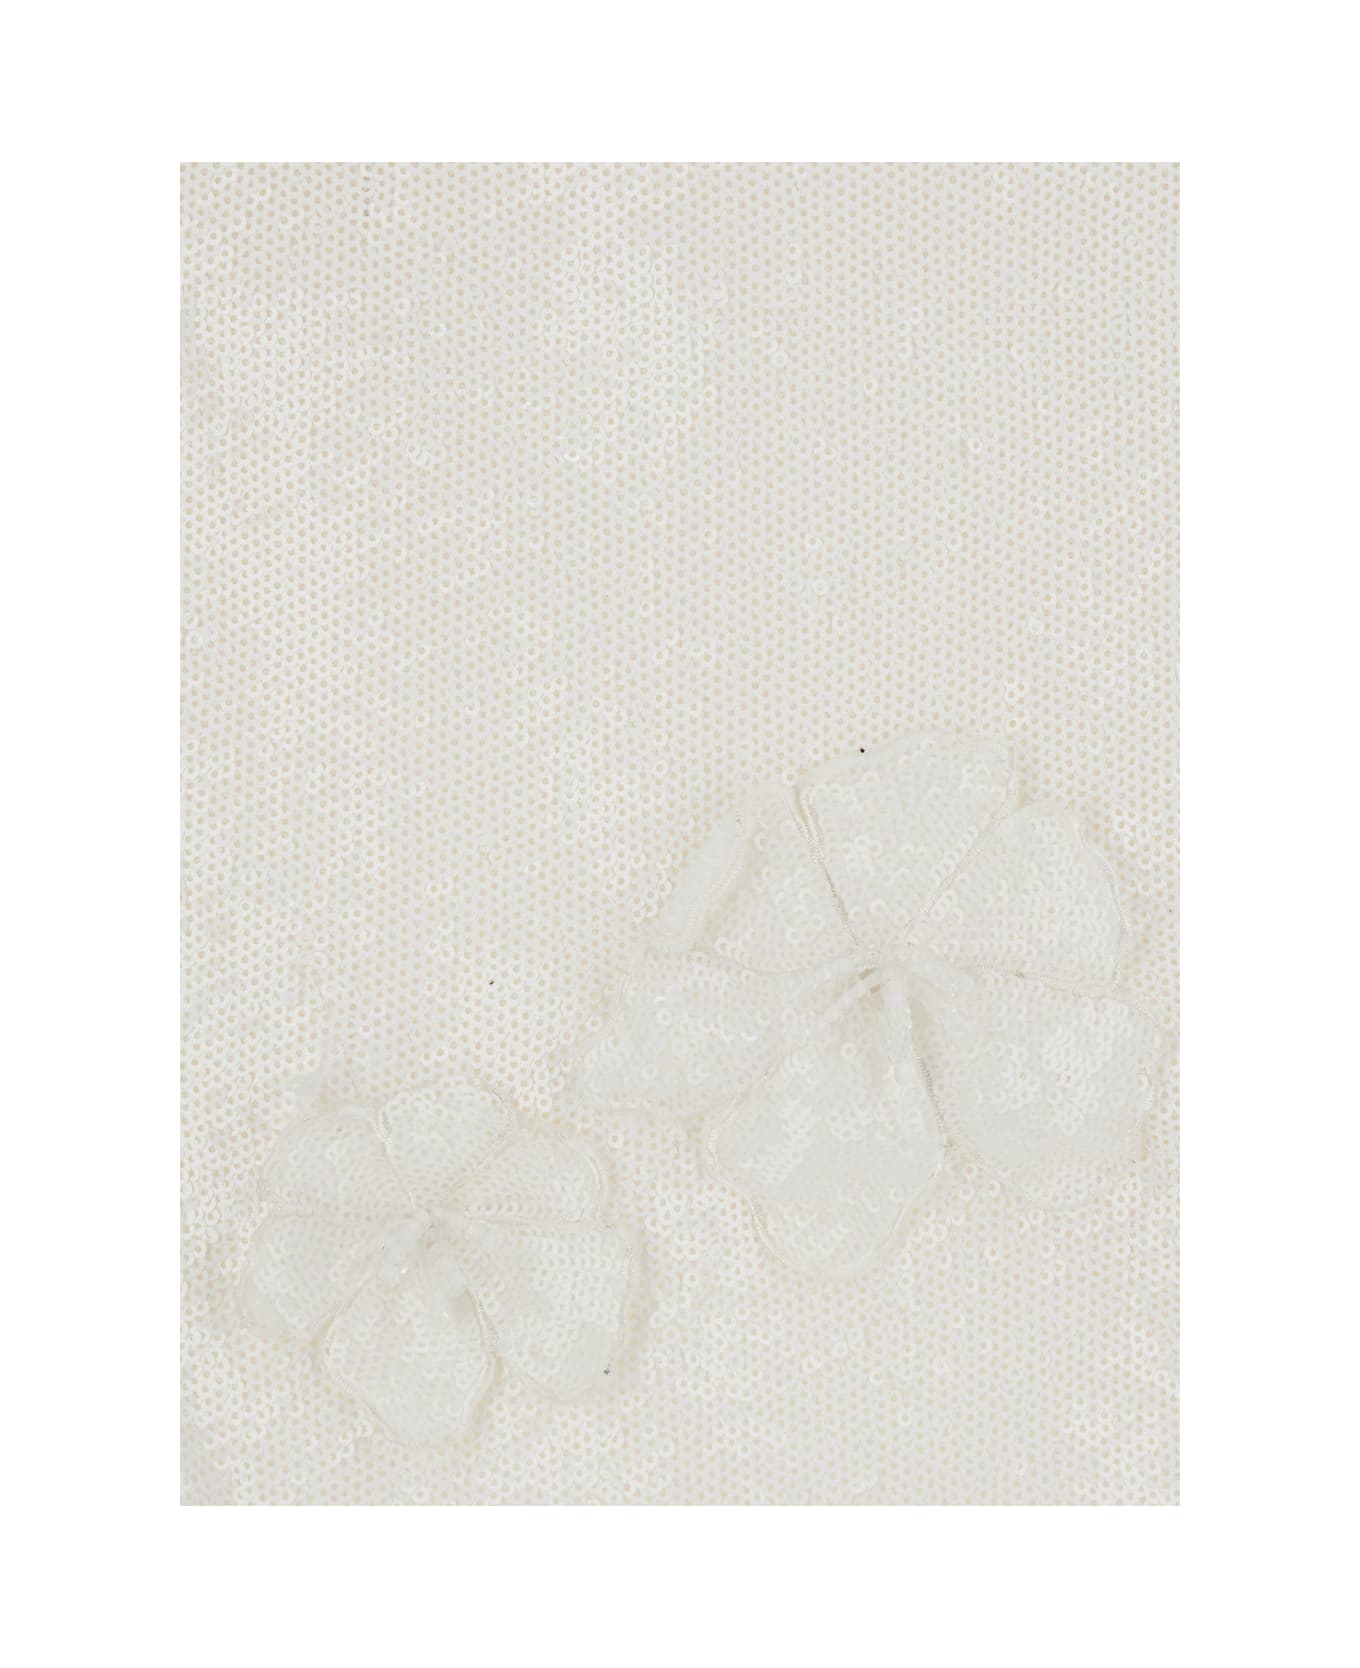 Rotate by Birger Christensen Mini White Skirt With Flowers And Sequins In Fabric Woman - White スカート